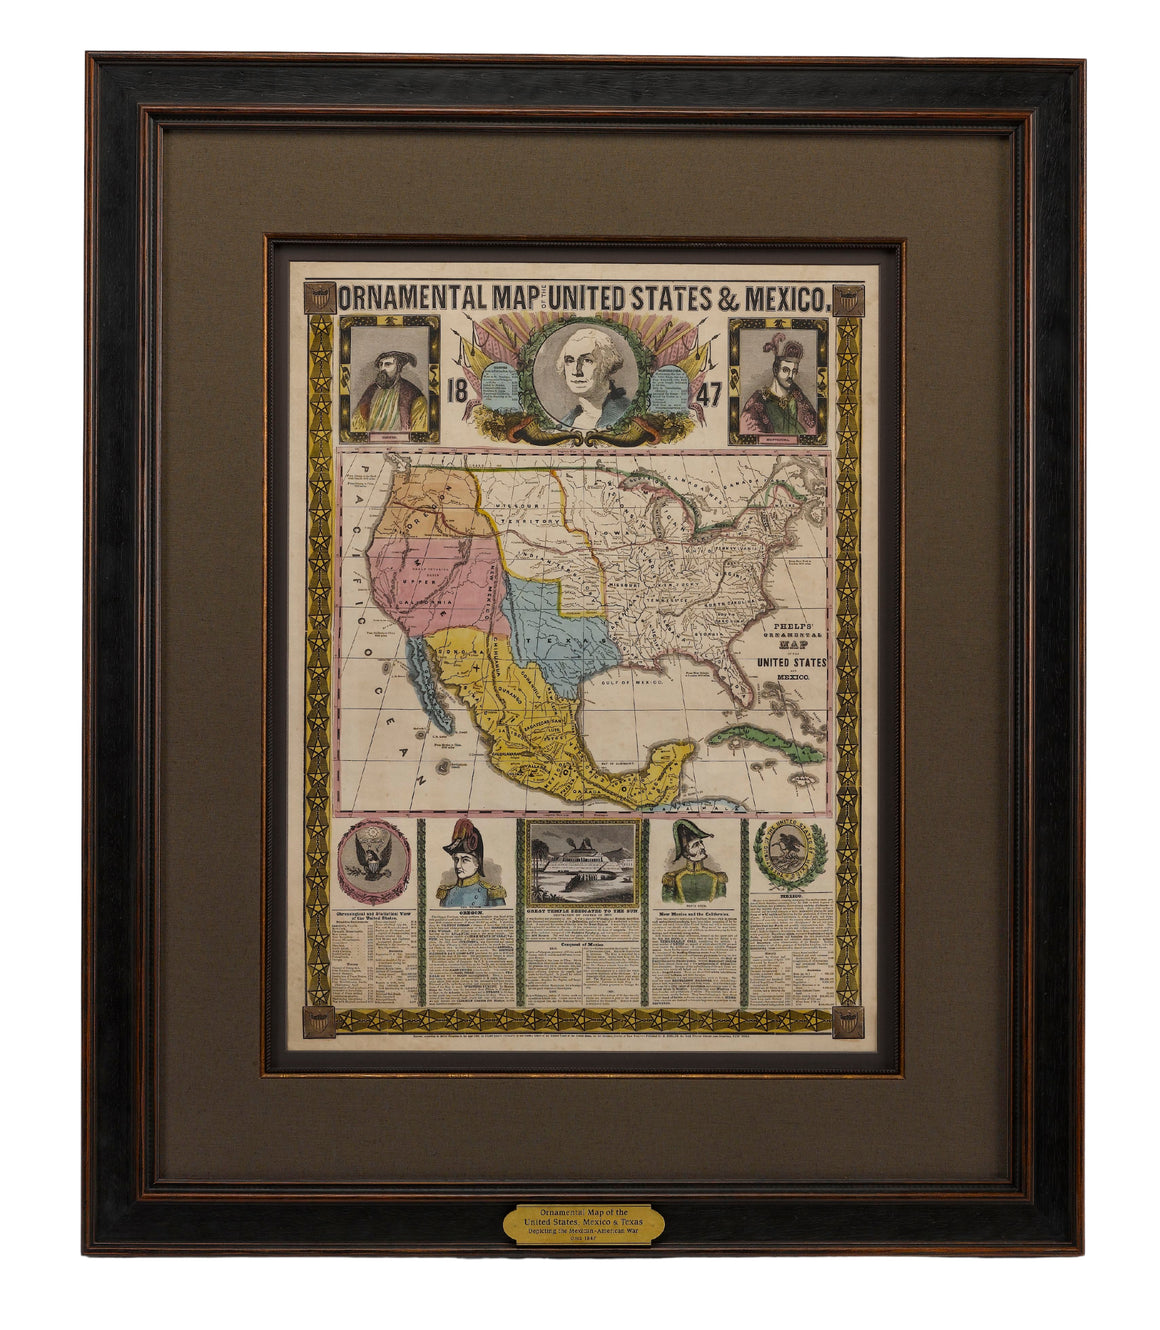 1847 "Ornamental Map of the United States & Mexico" by H. Phelps, Hand-Colored Broadside